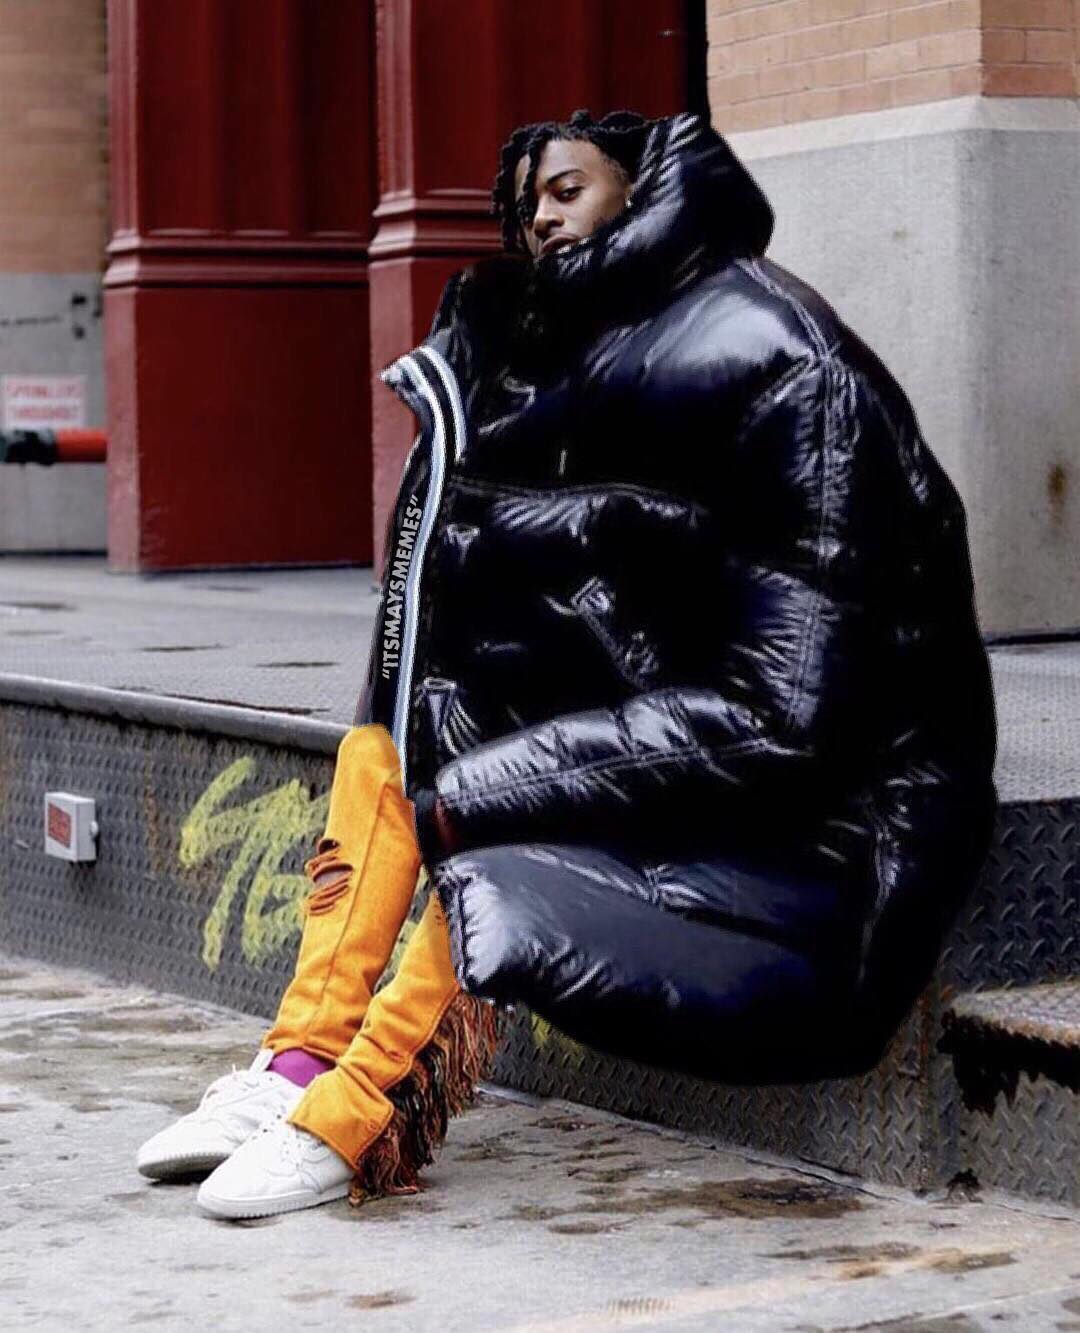 Big-Jacket Memes on Instagram, from Luka Sabbat to Joey from